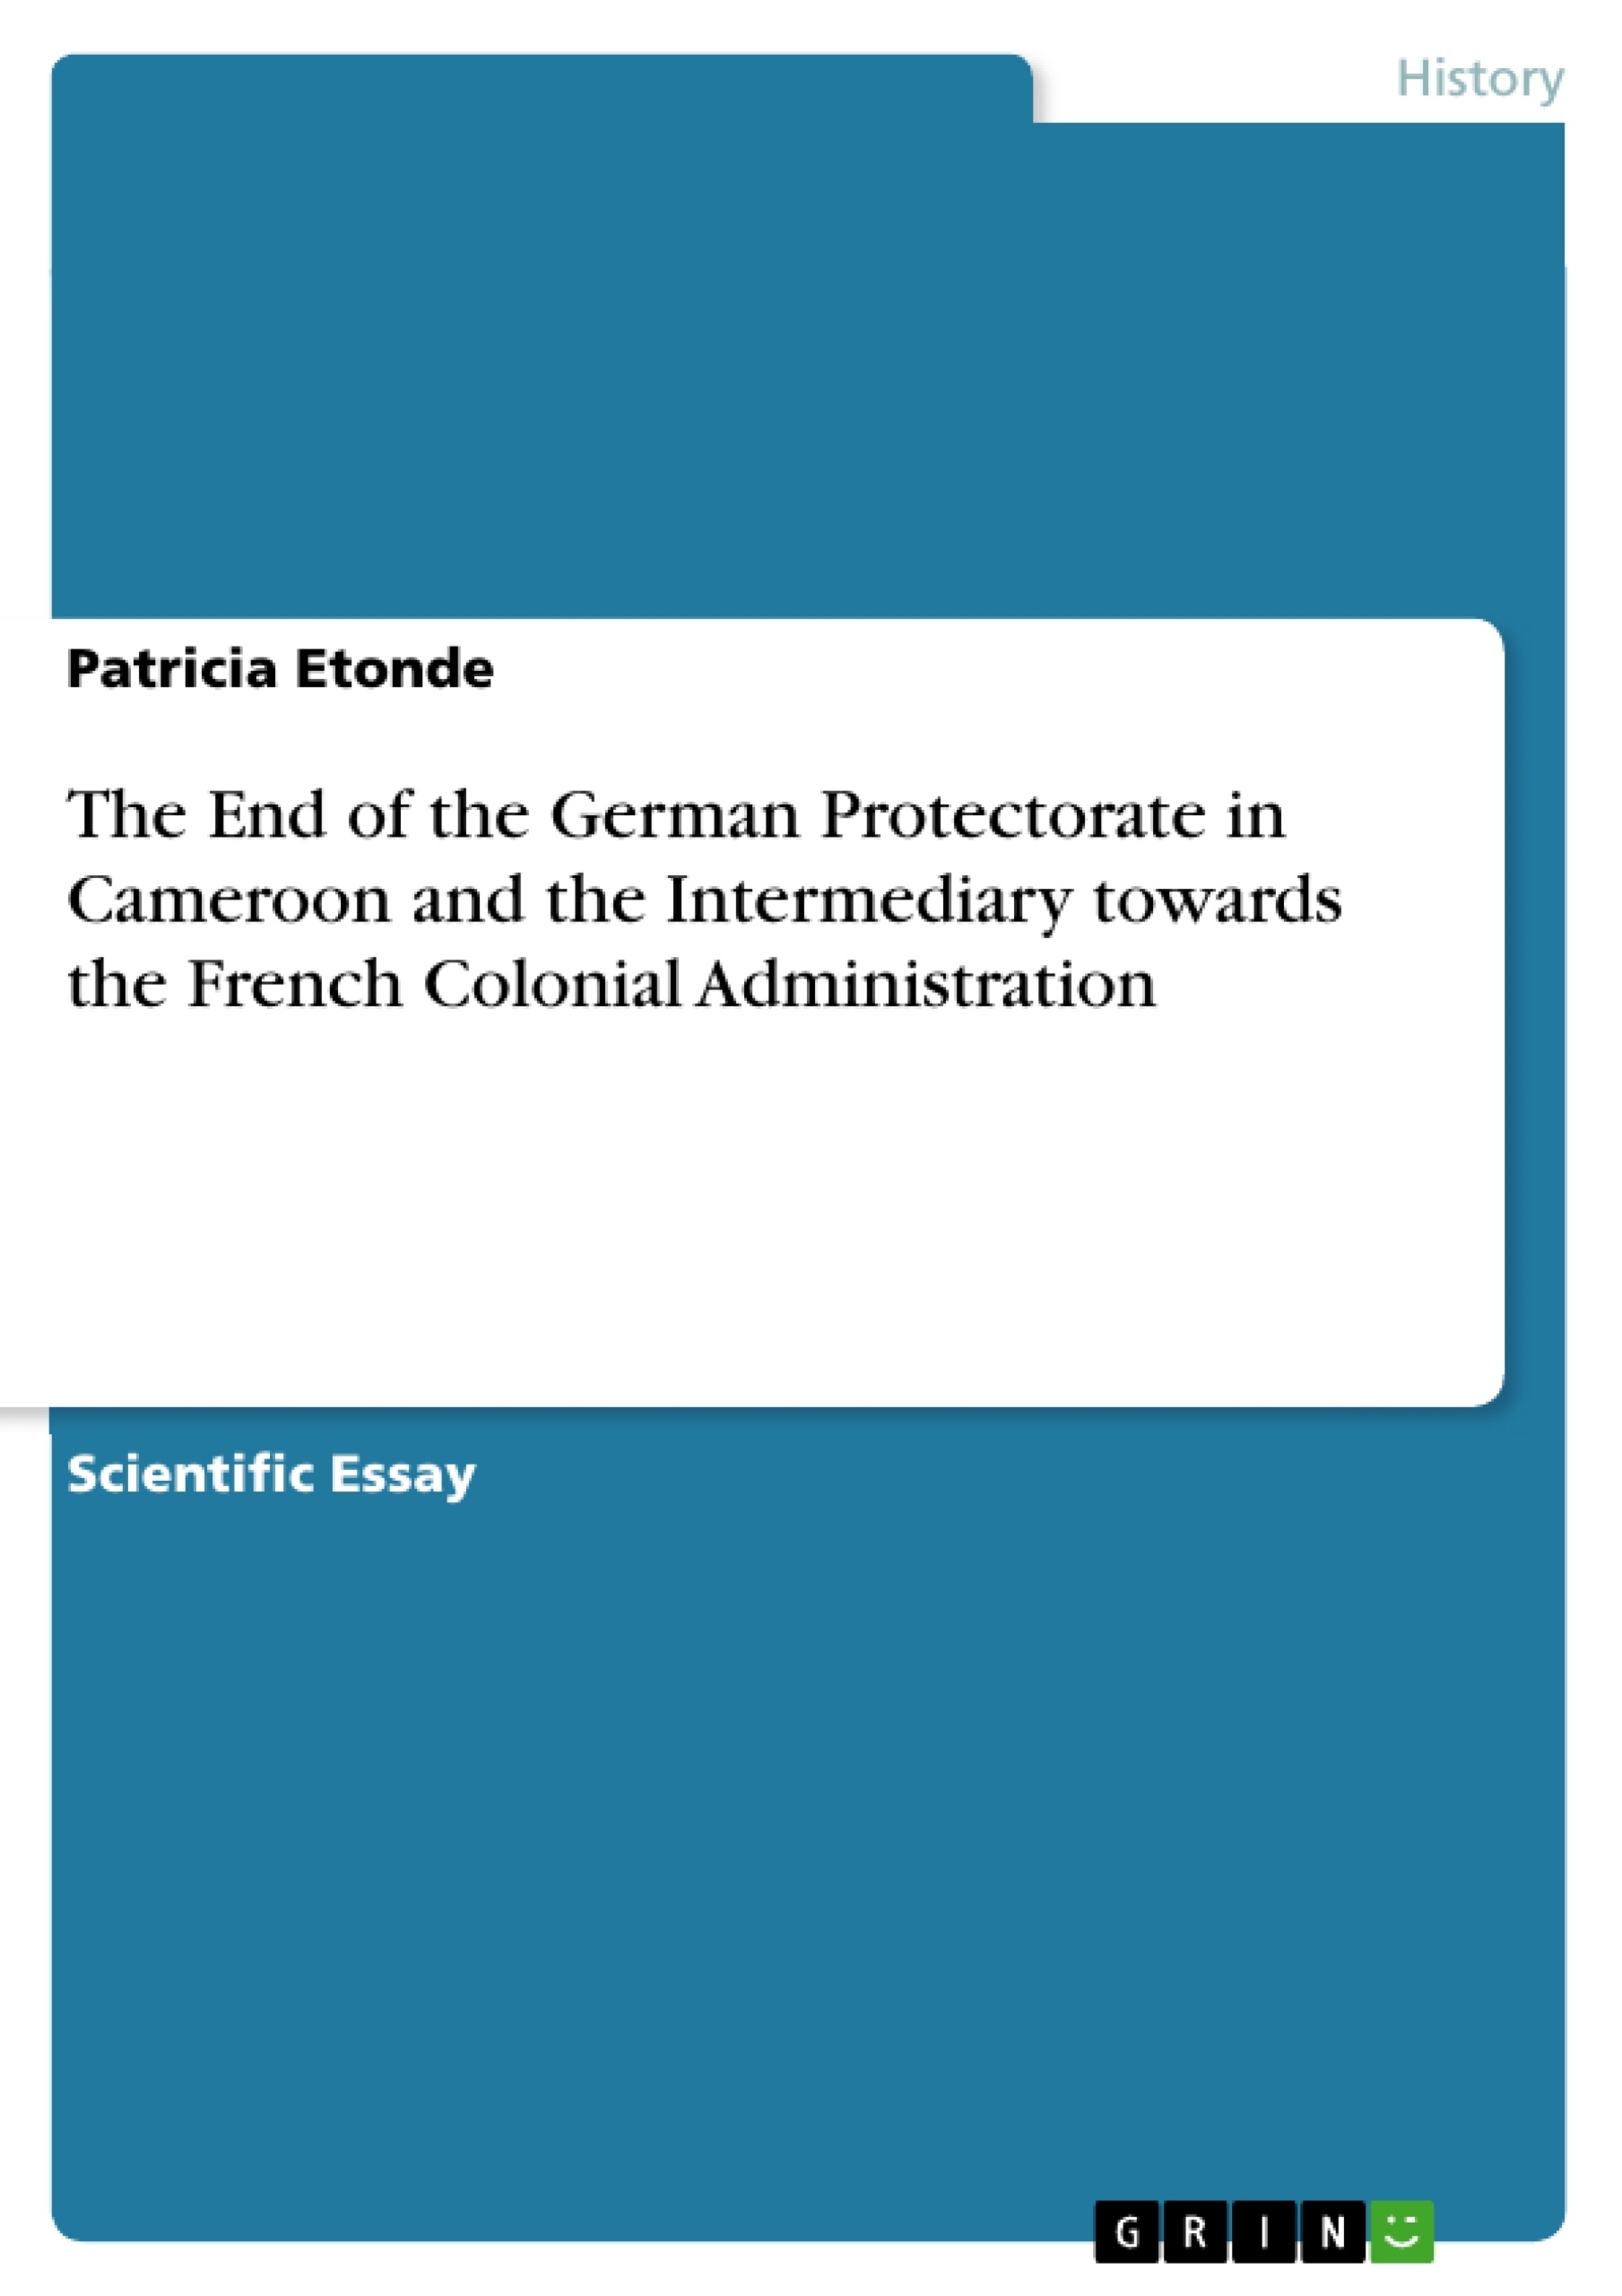 Title: The End of the German Protectorate in Cameroon and the Intermediary towards the French Colonial Administration